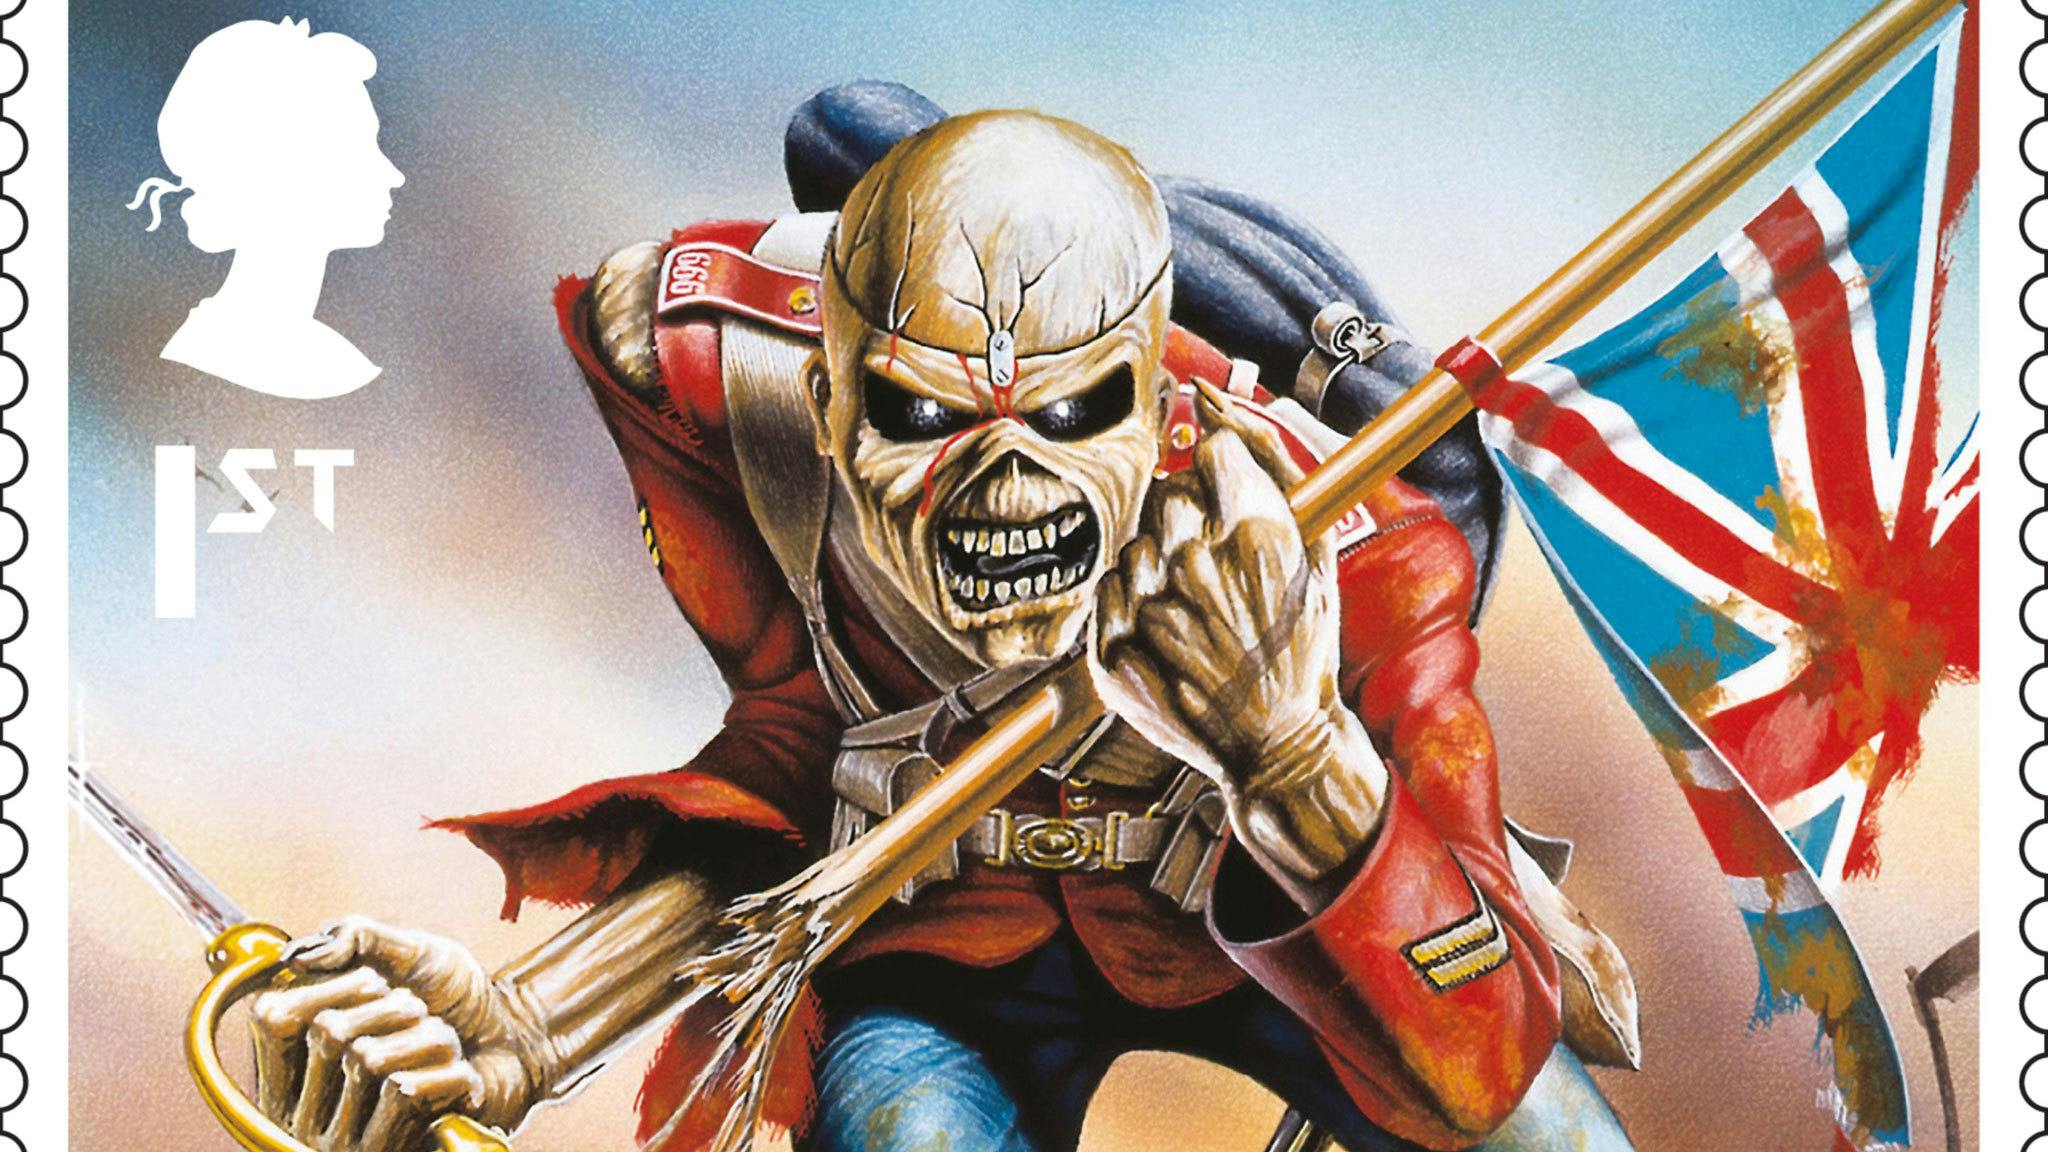 Royal Mail pay tribute to Iron Maiden with 12 special stamps